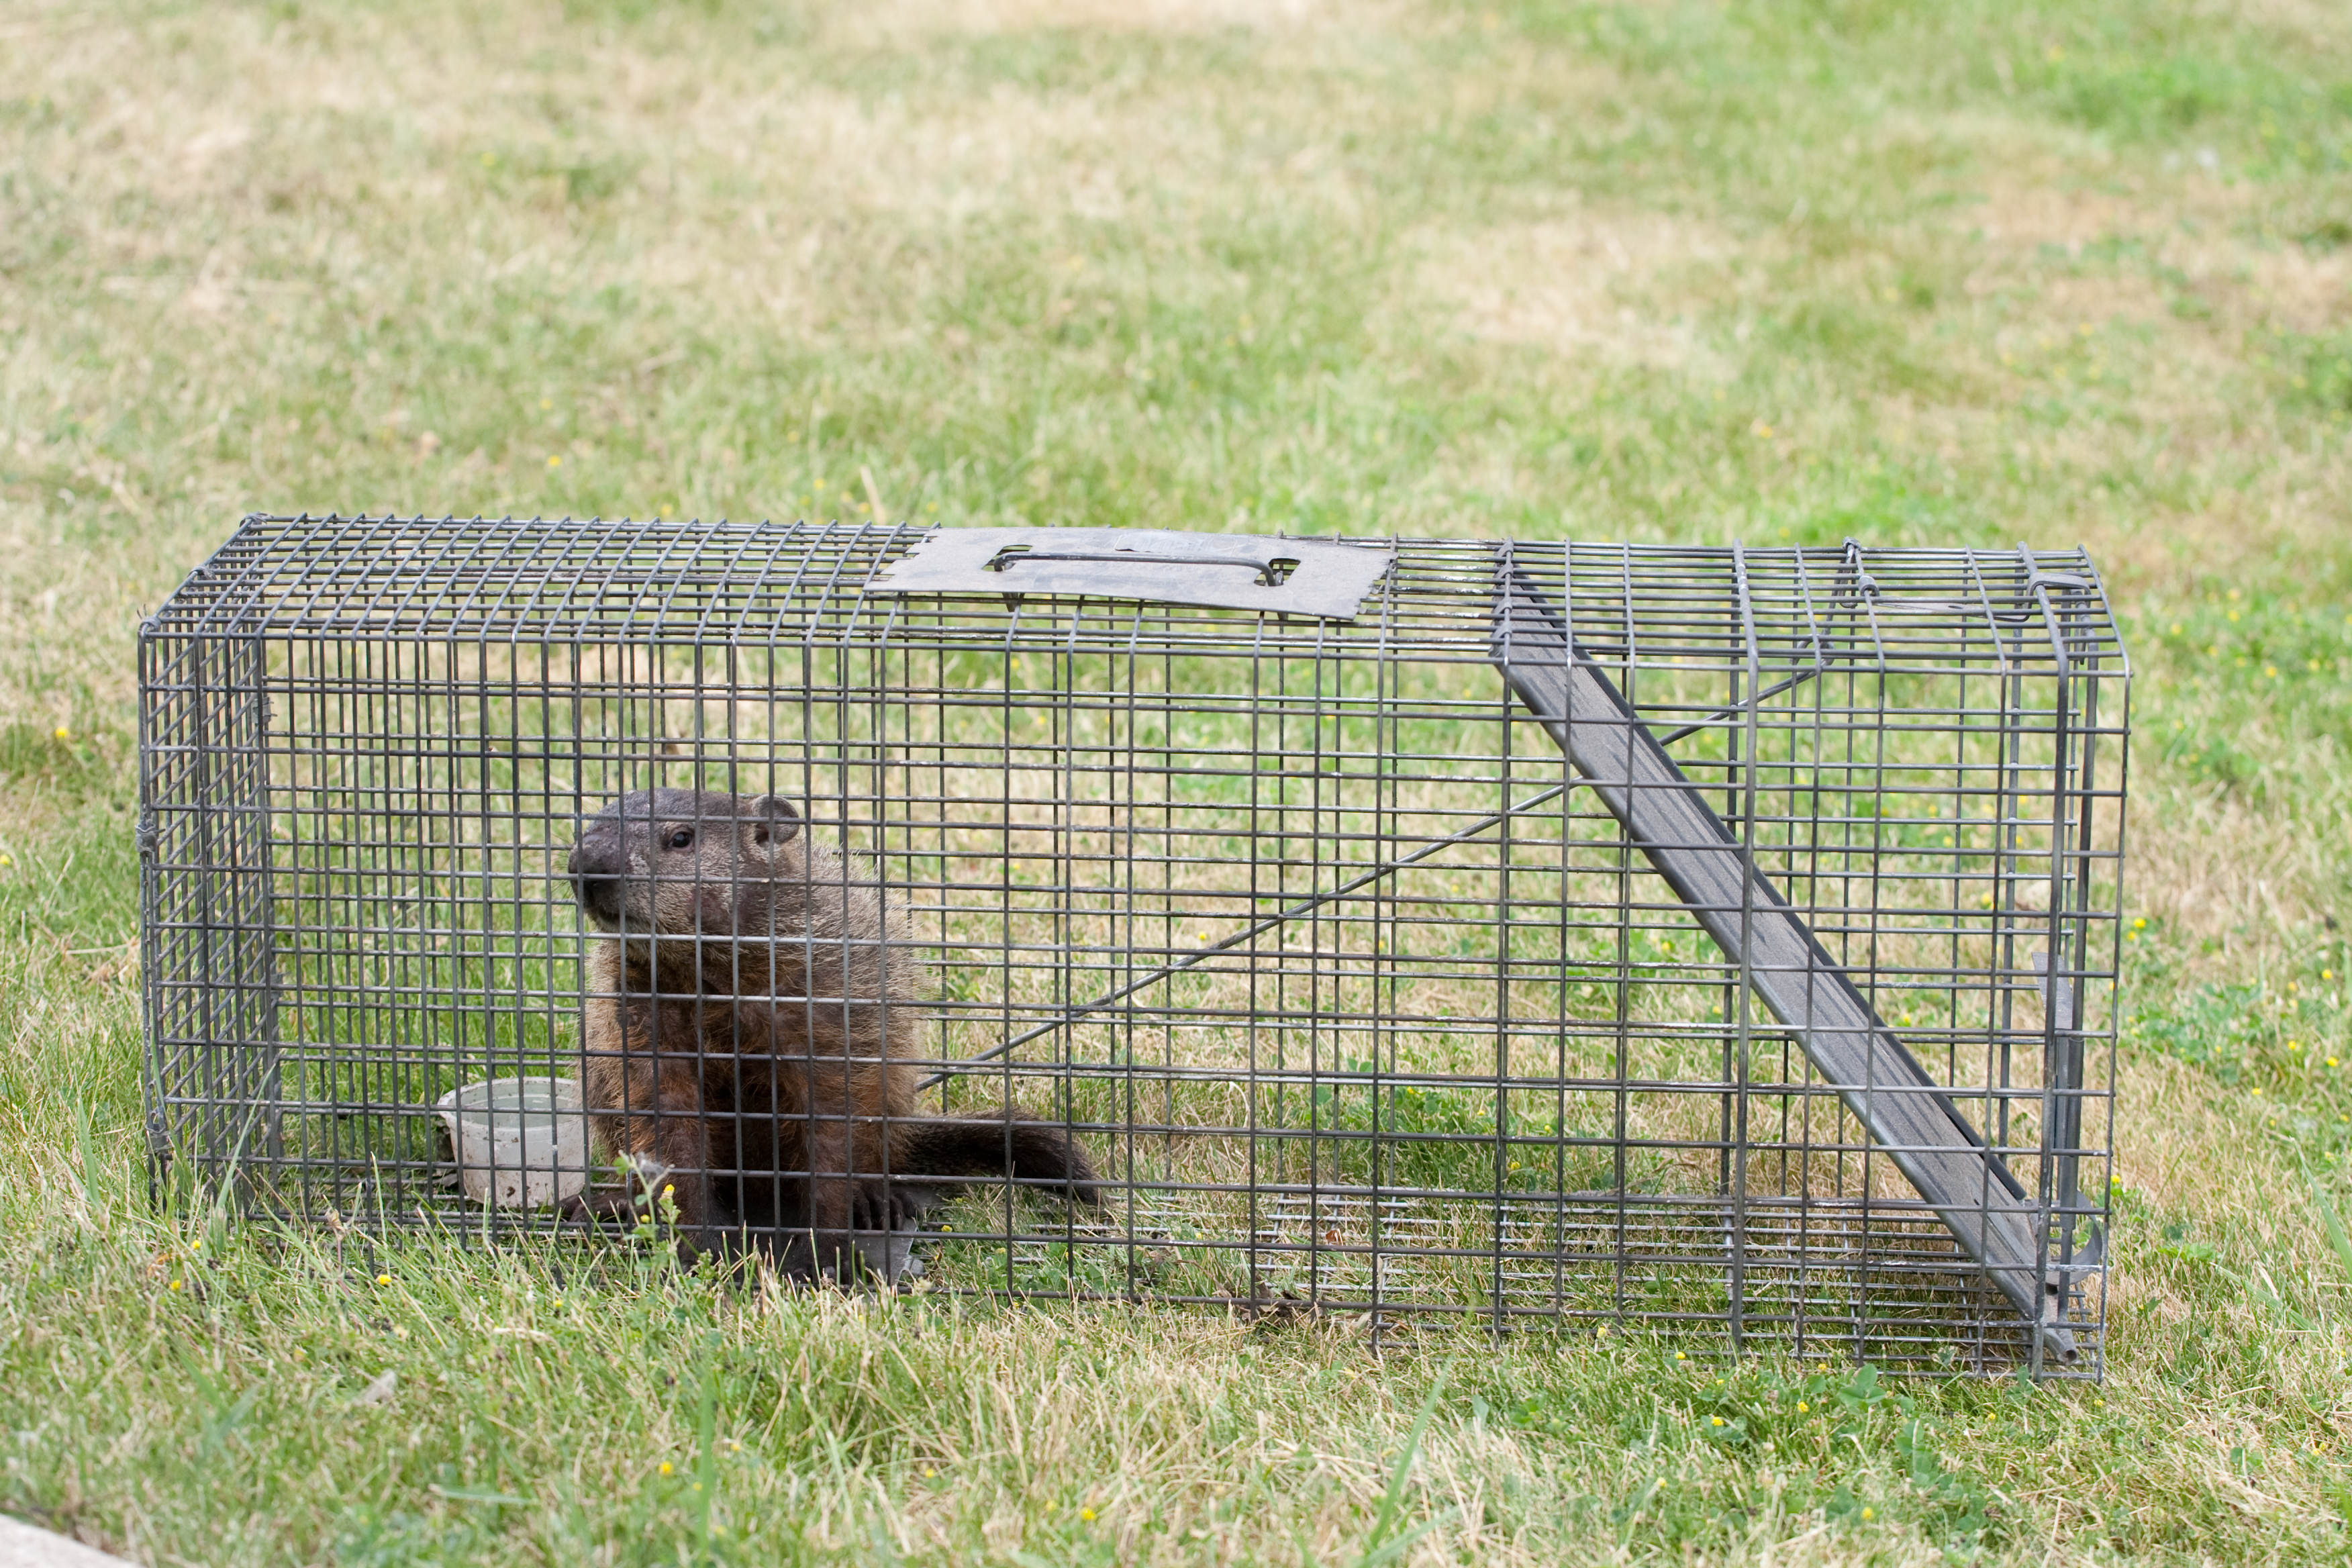 How to trap and remove problem woodchucks in New York, Woodchuck